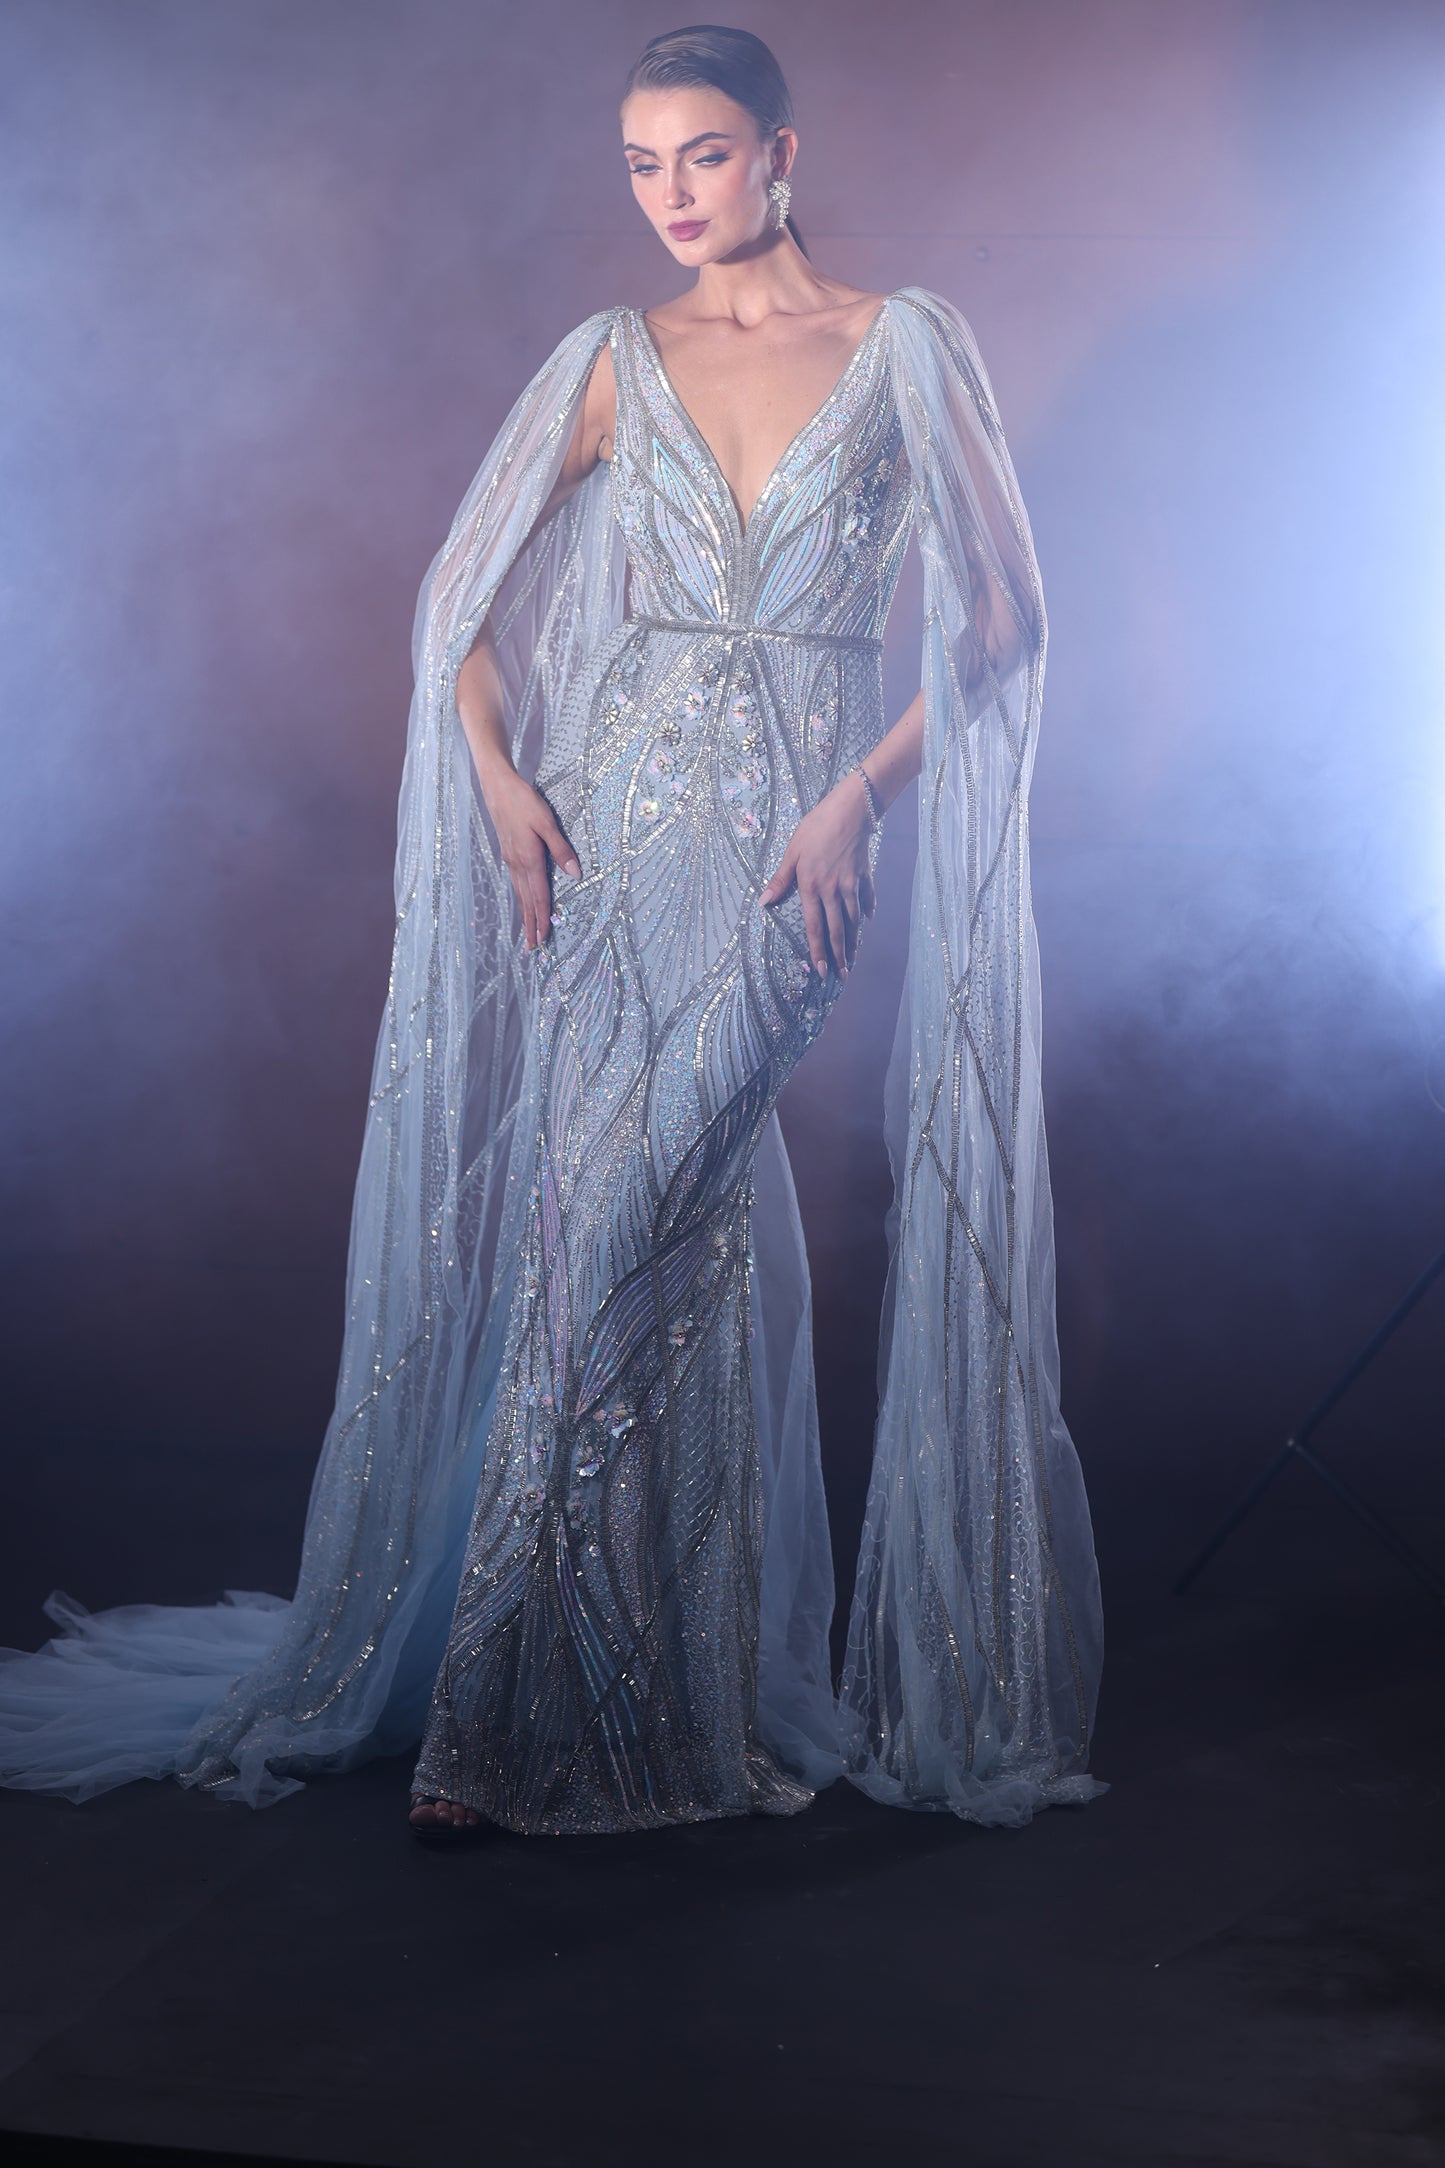 POWDER BLUE GOWN WITH WINGS